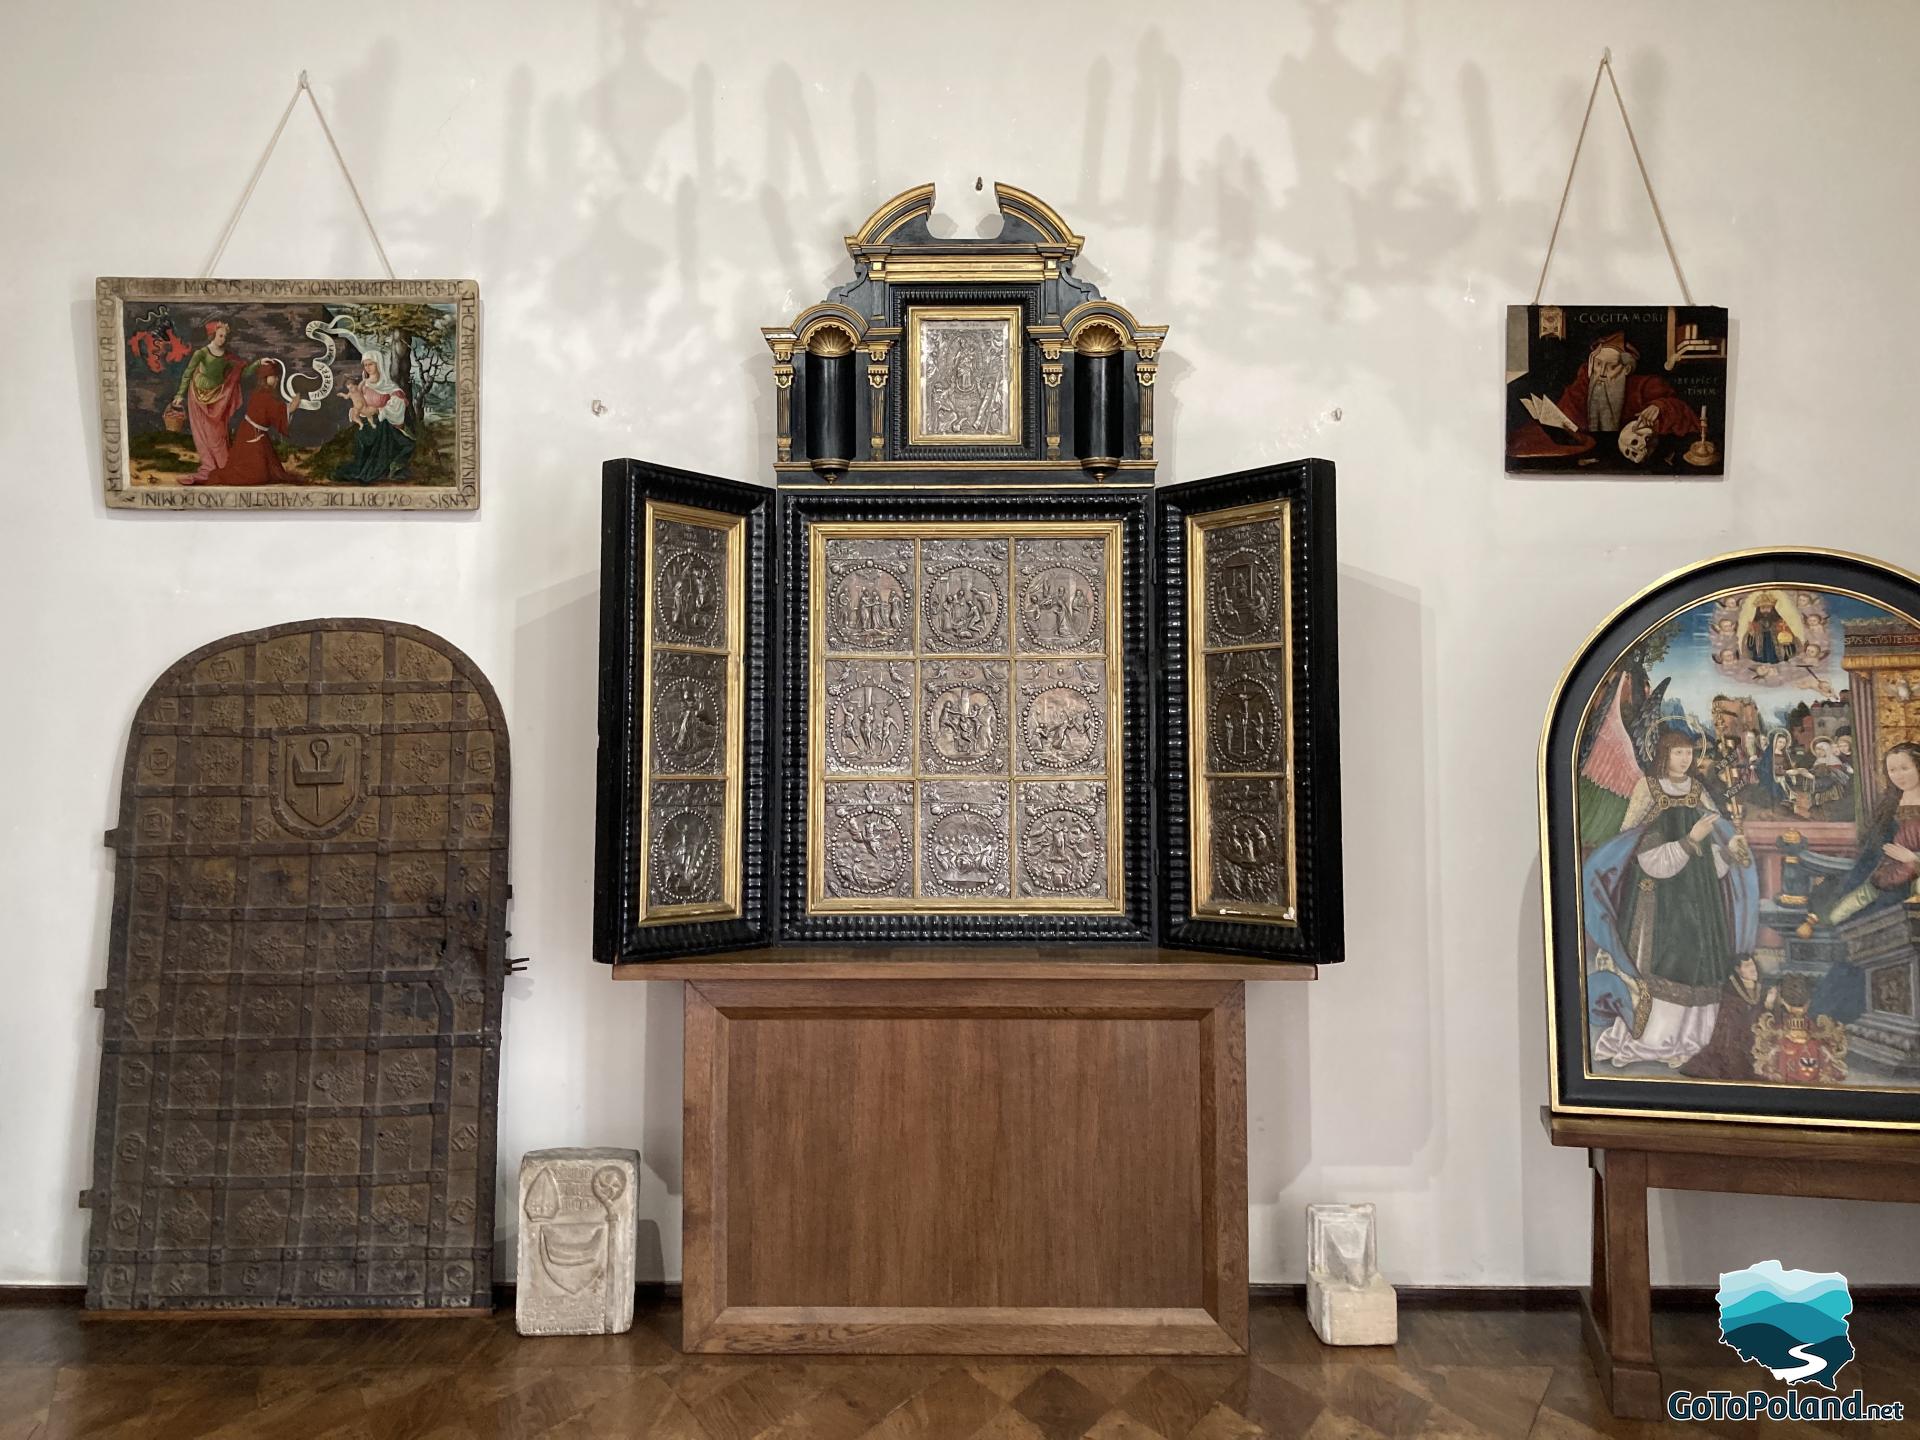 silver altar in the form of a triptych surrounded by a few paintings